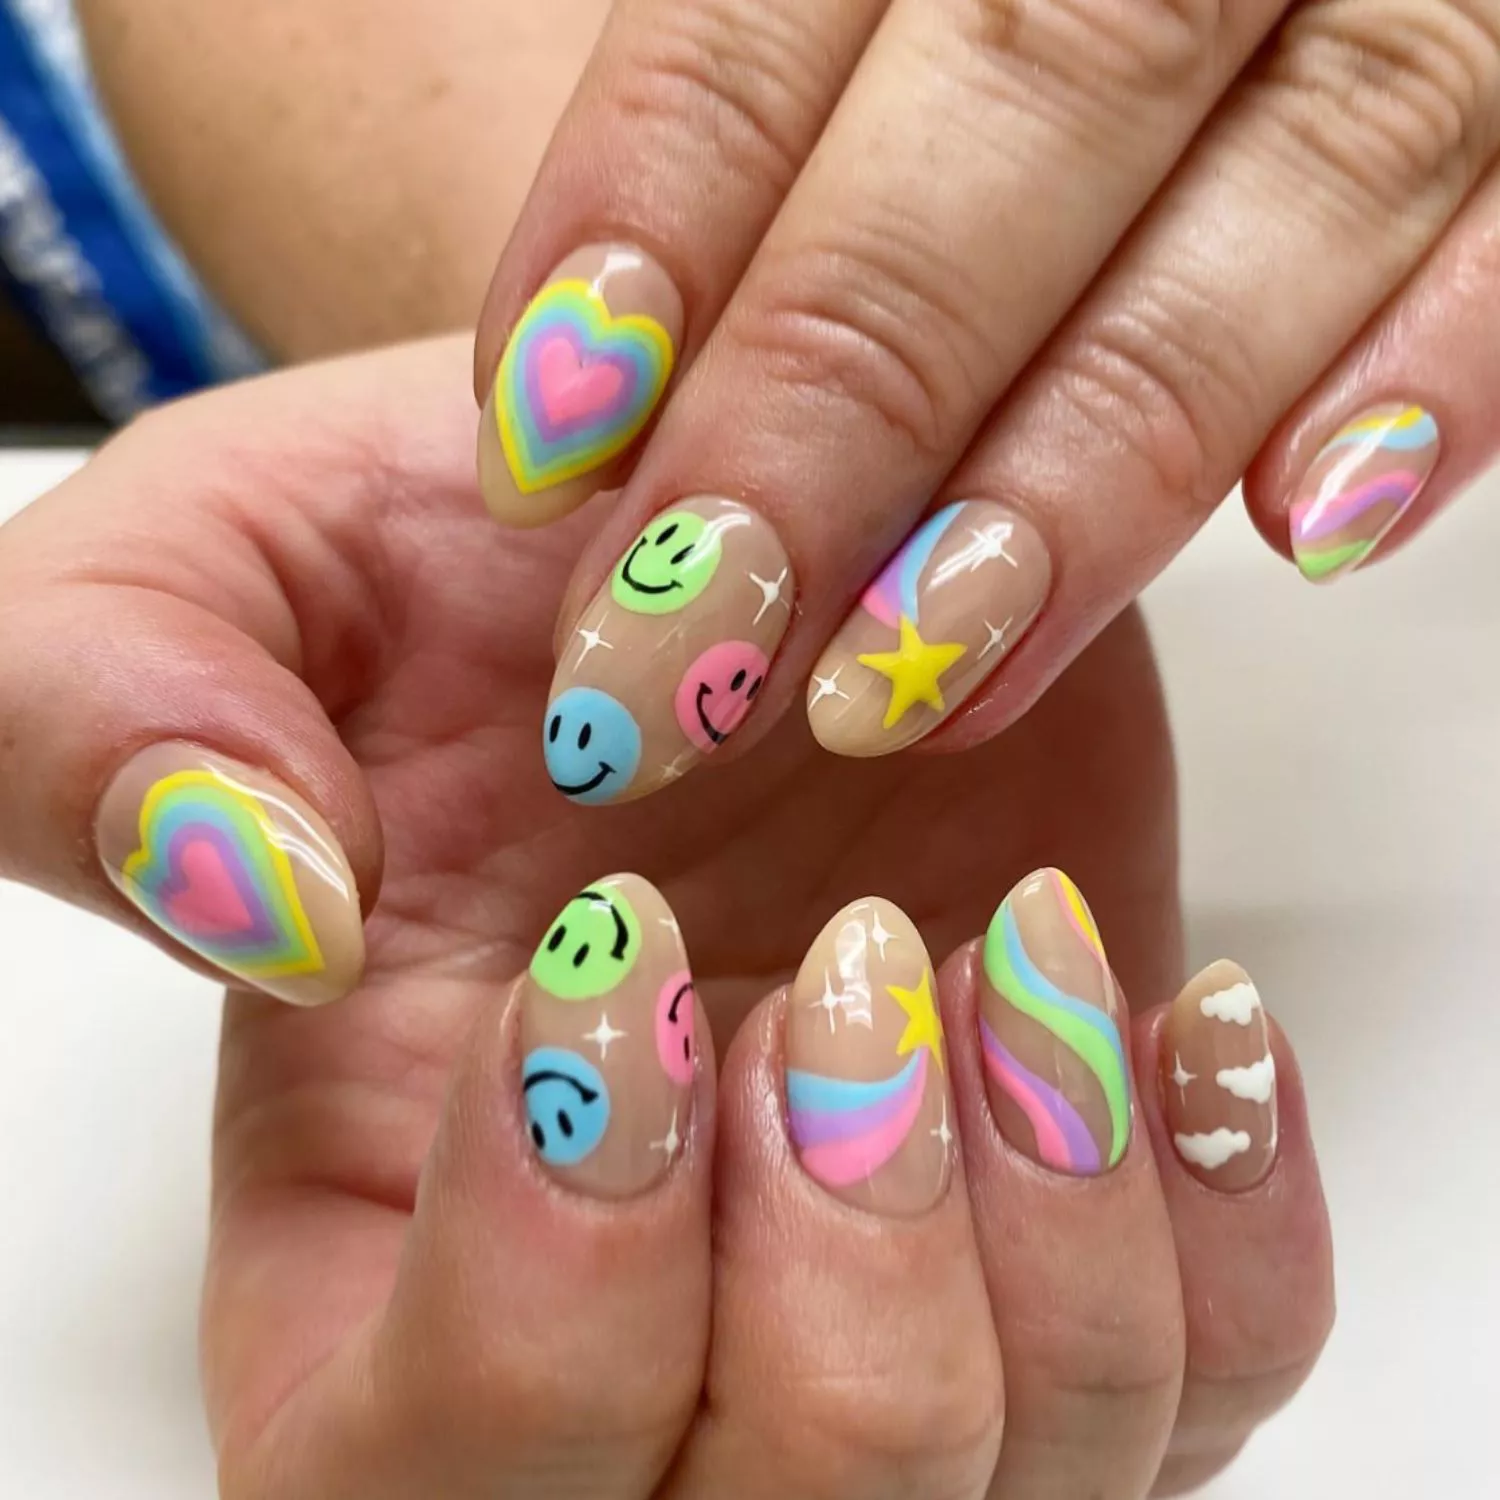 Y2K manicure with neutral base and colorful star, heart, wave, and smiley face designs